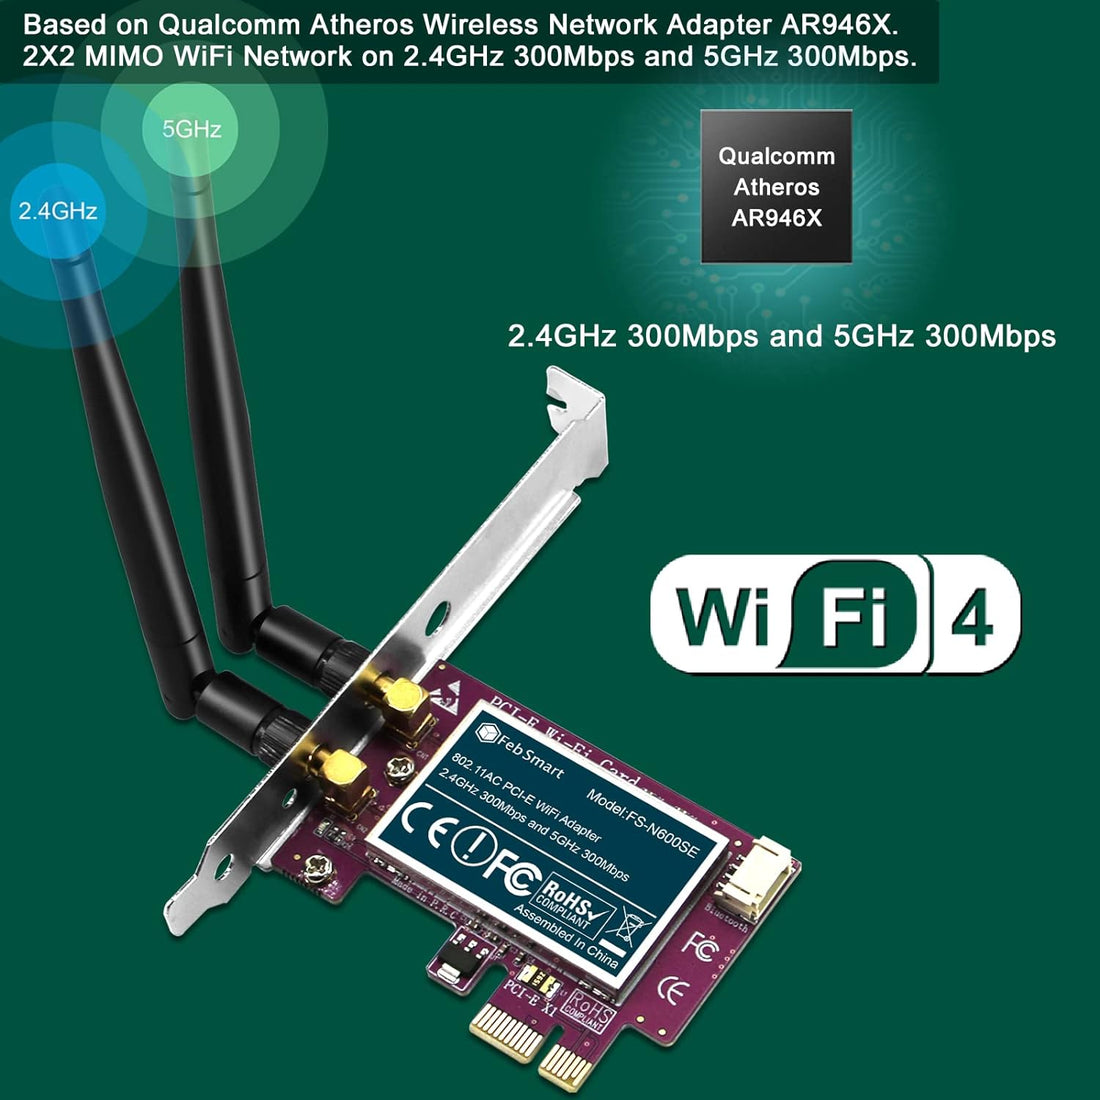 FebSmart Wireless Dual Band N600 PCIE Wi-Fi Adapter with Bluetooth 4.0 for Windows XP,7,8,8.1 10 and Windows Server (32/64bit) Desktop PCs-2.4GHz 300Mbps or 5GHz 300Mbps PCIE Wi-Fi Card (FS-N600BT)